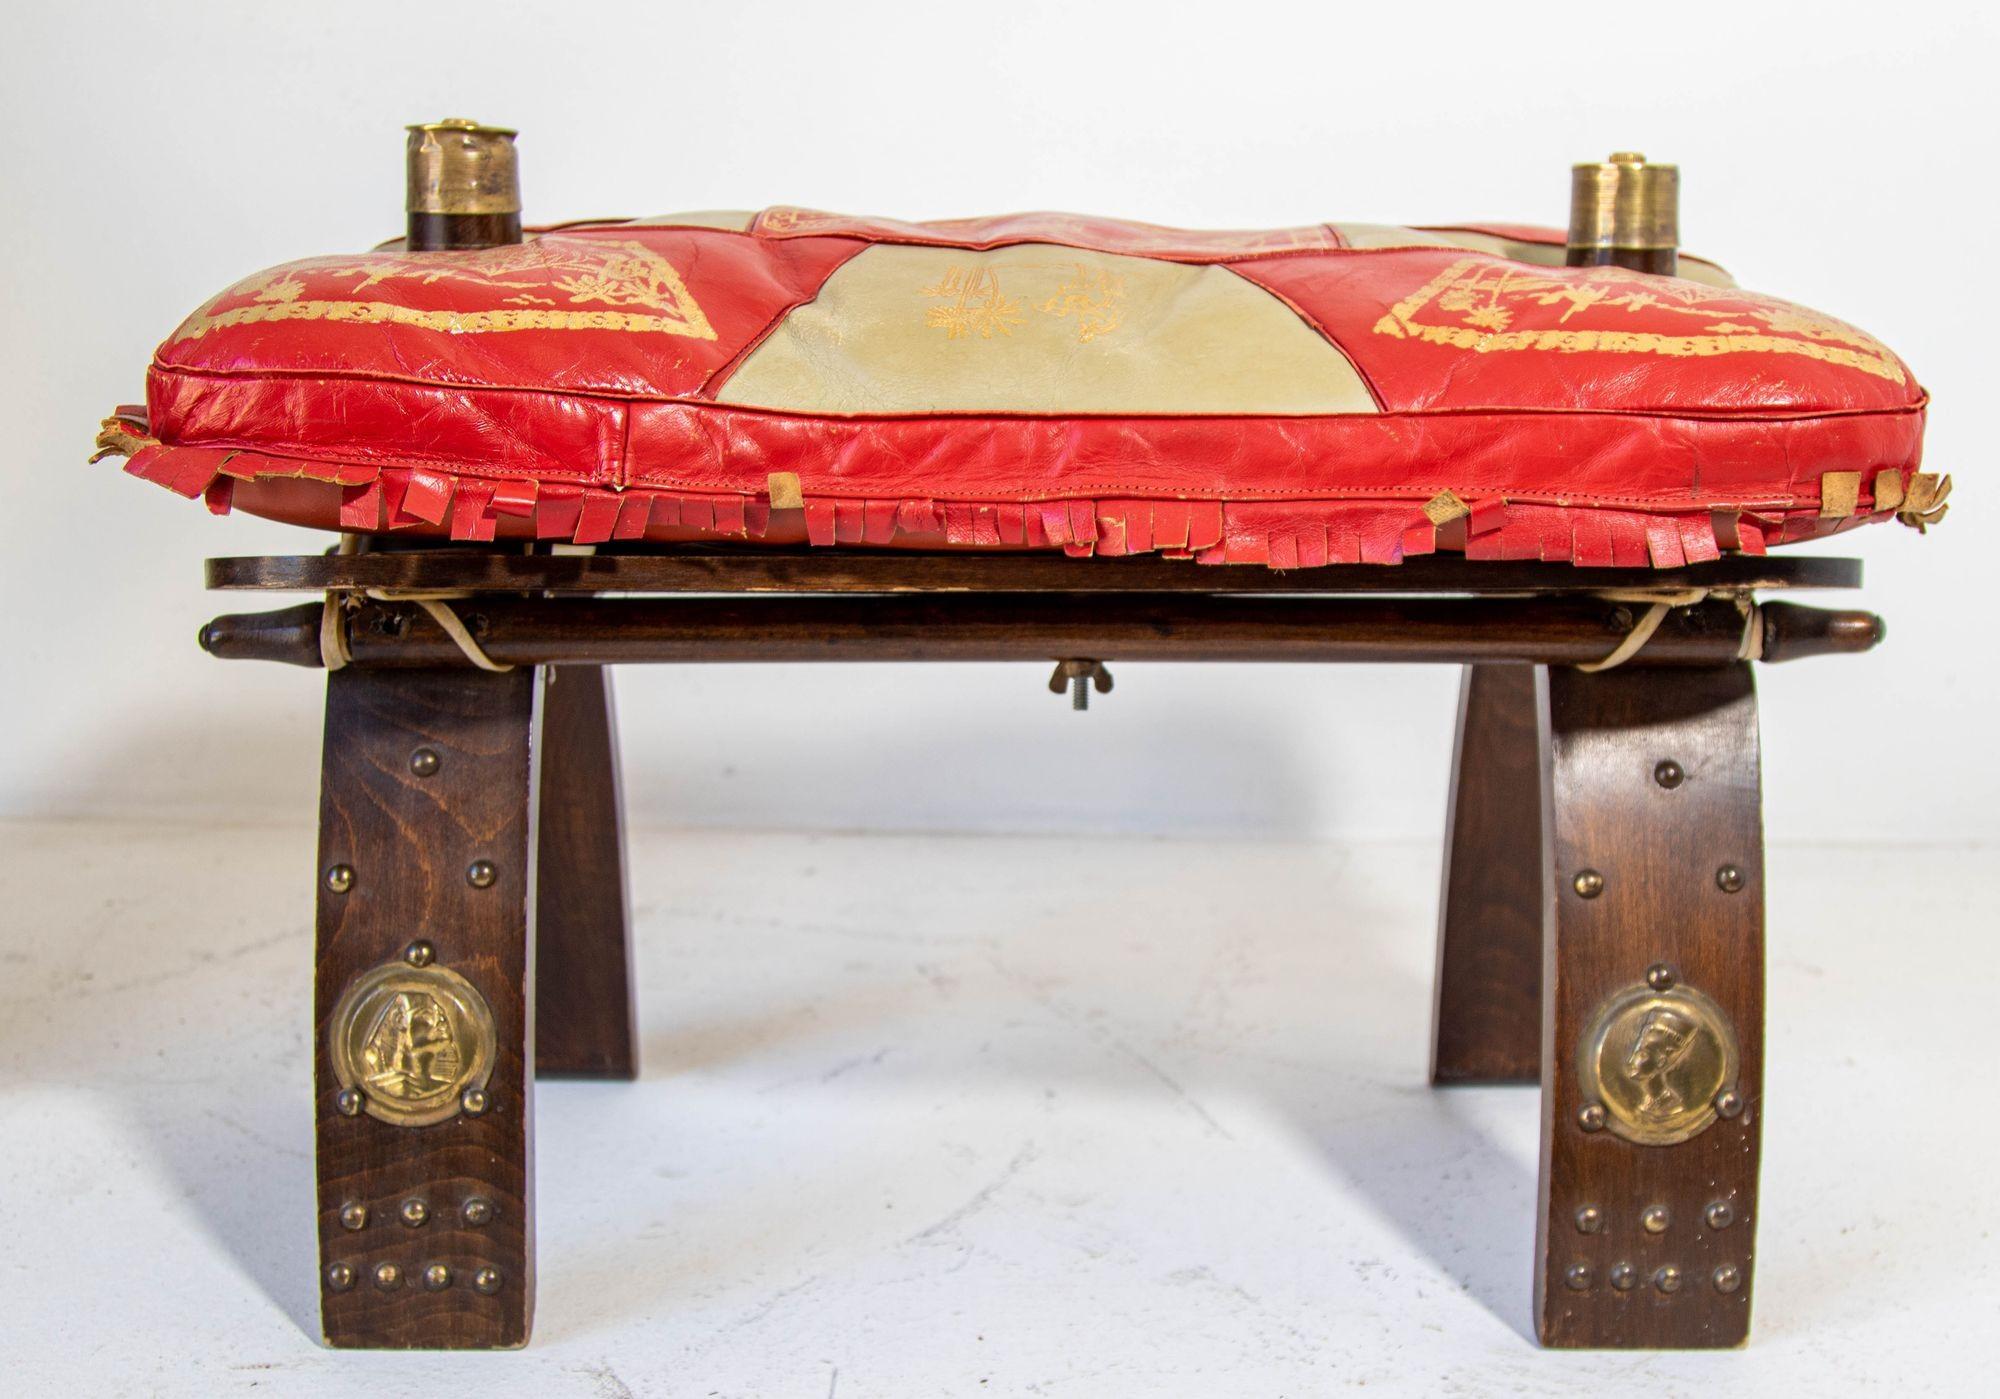 Egyptian Revival 1950s Egyptian Ottoman Camel Saddle Stool with Red and Gold Cushion For Sale